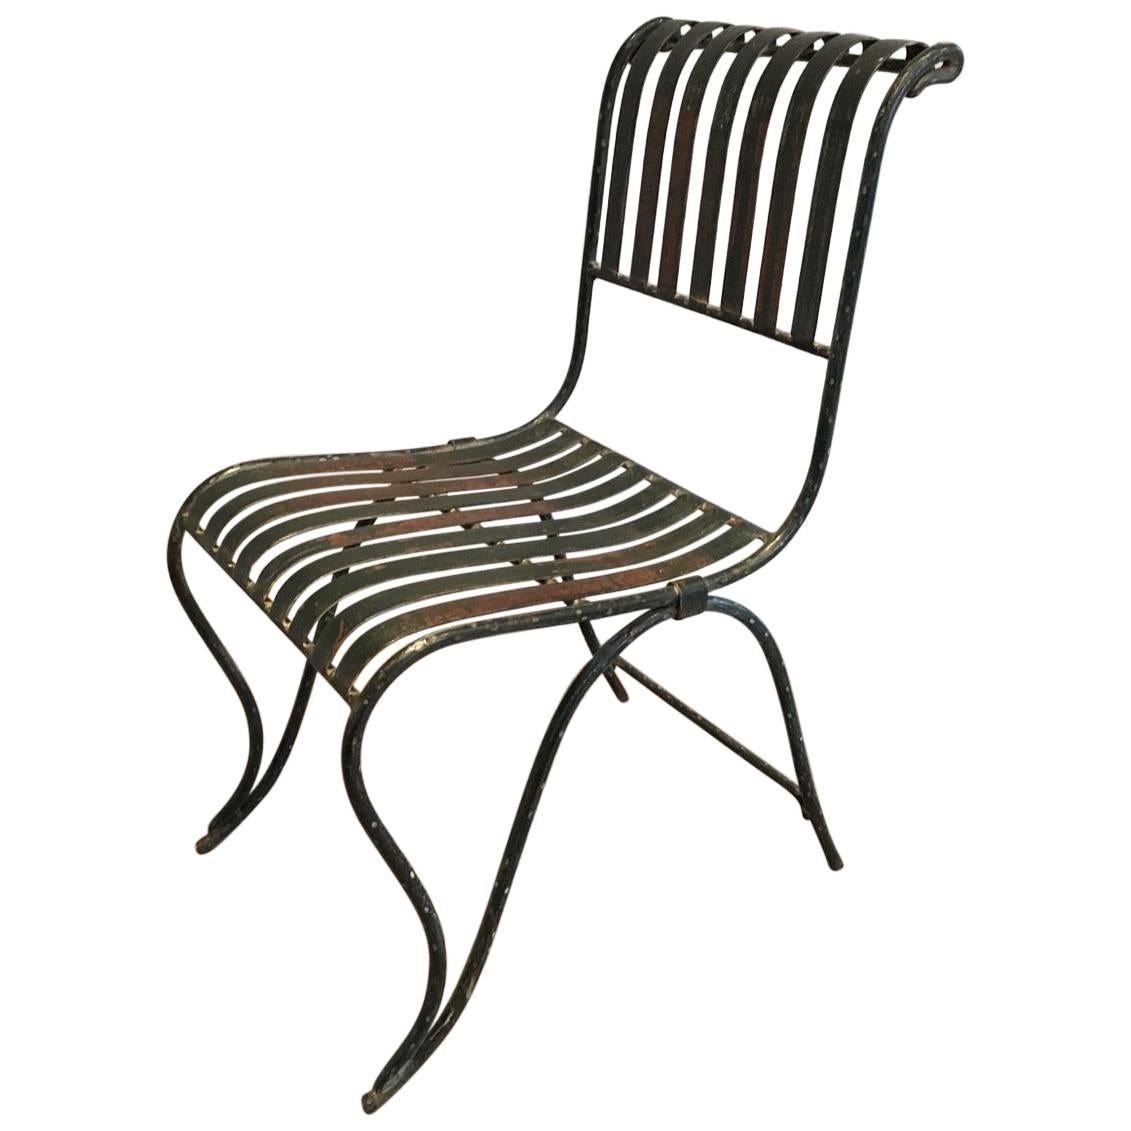 French Wrought Iron Garden Chair